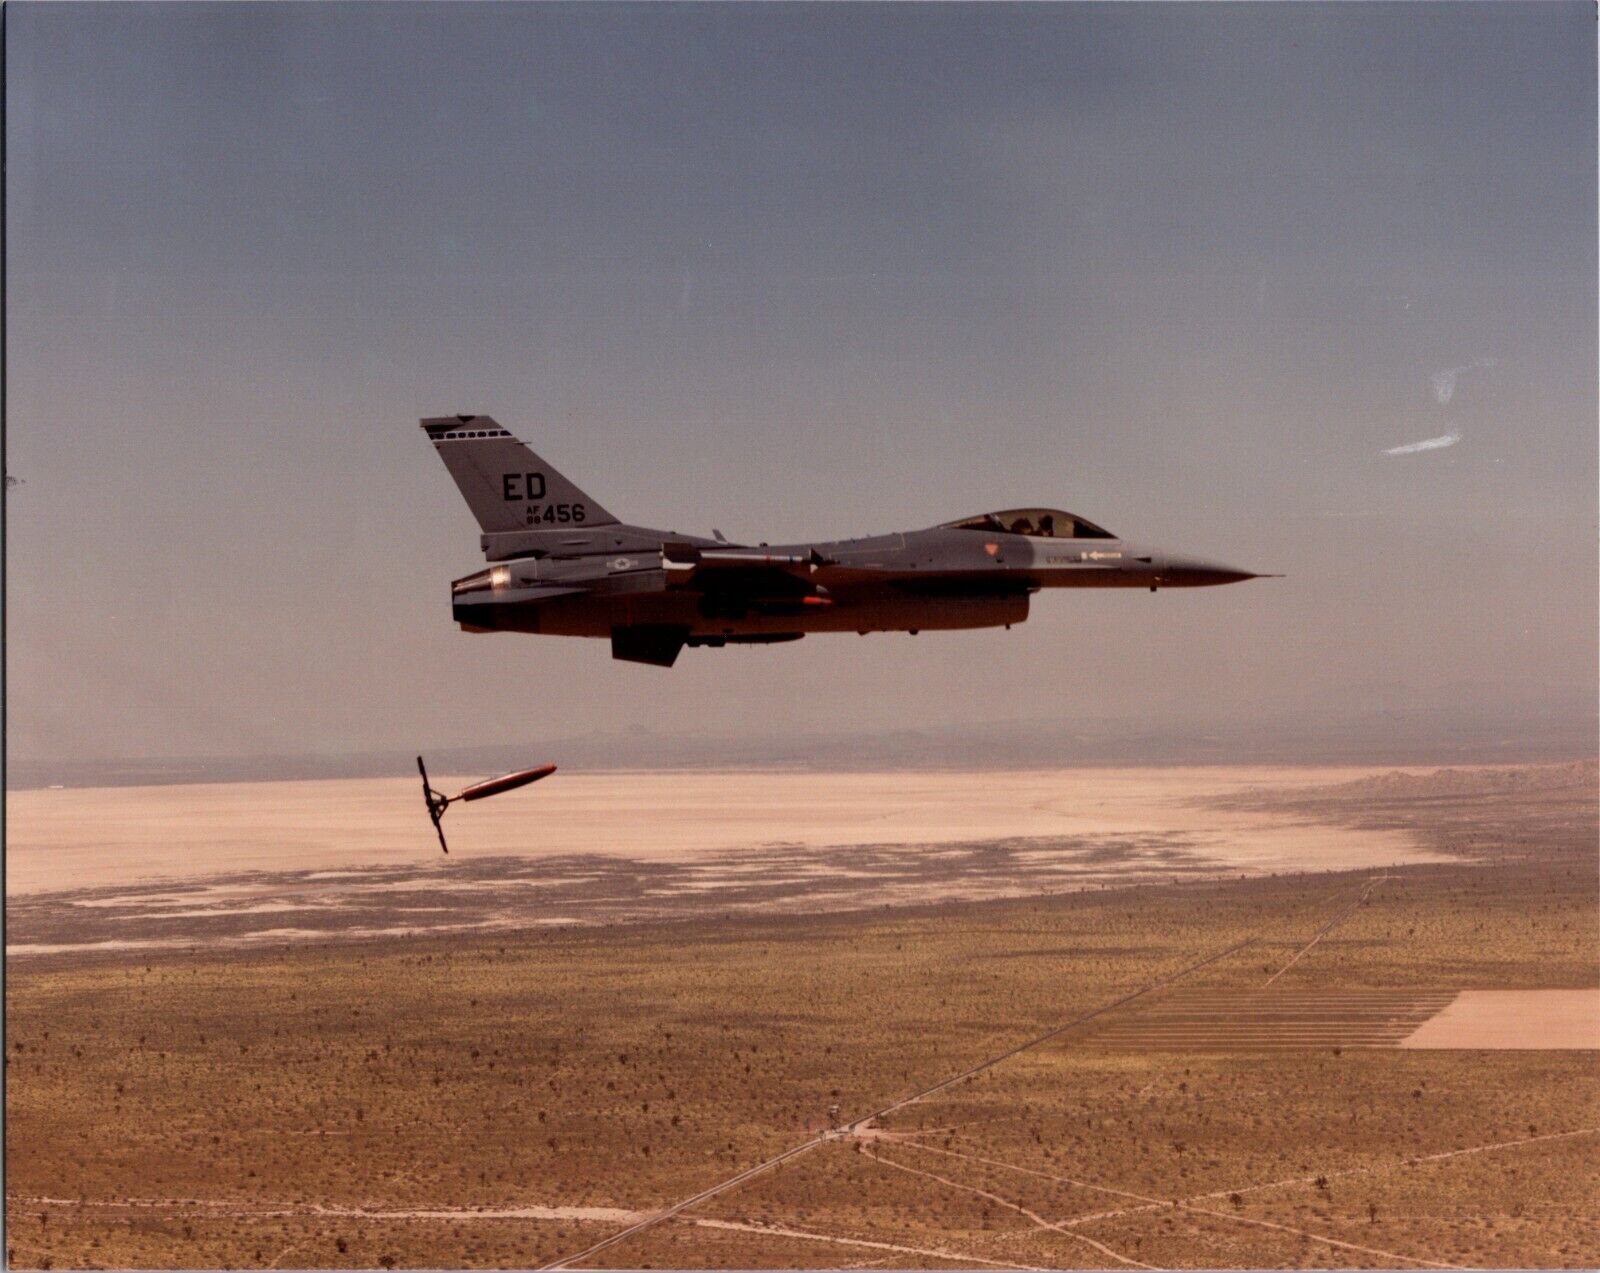 USAF F-16 Fighting Falcon Aircraft 8X10 Inch Photo Edwards Air Force Base 1980s